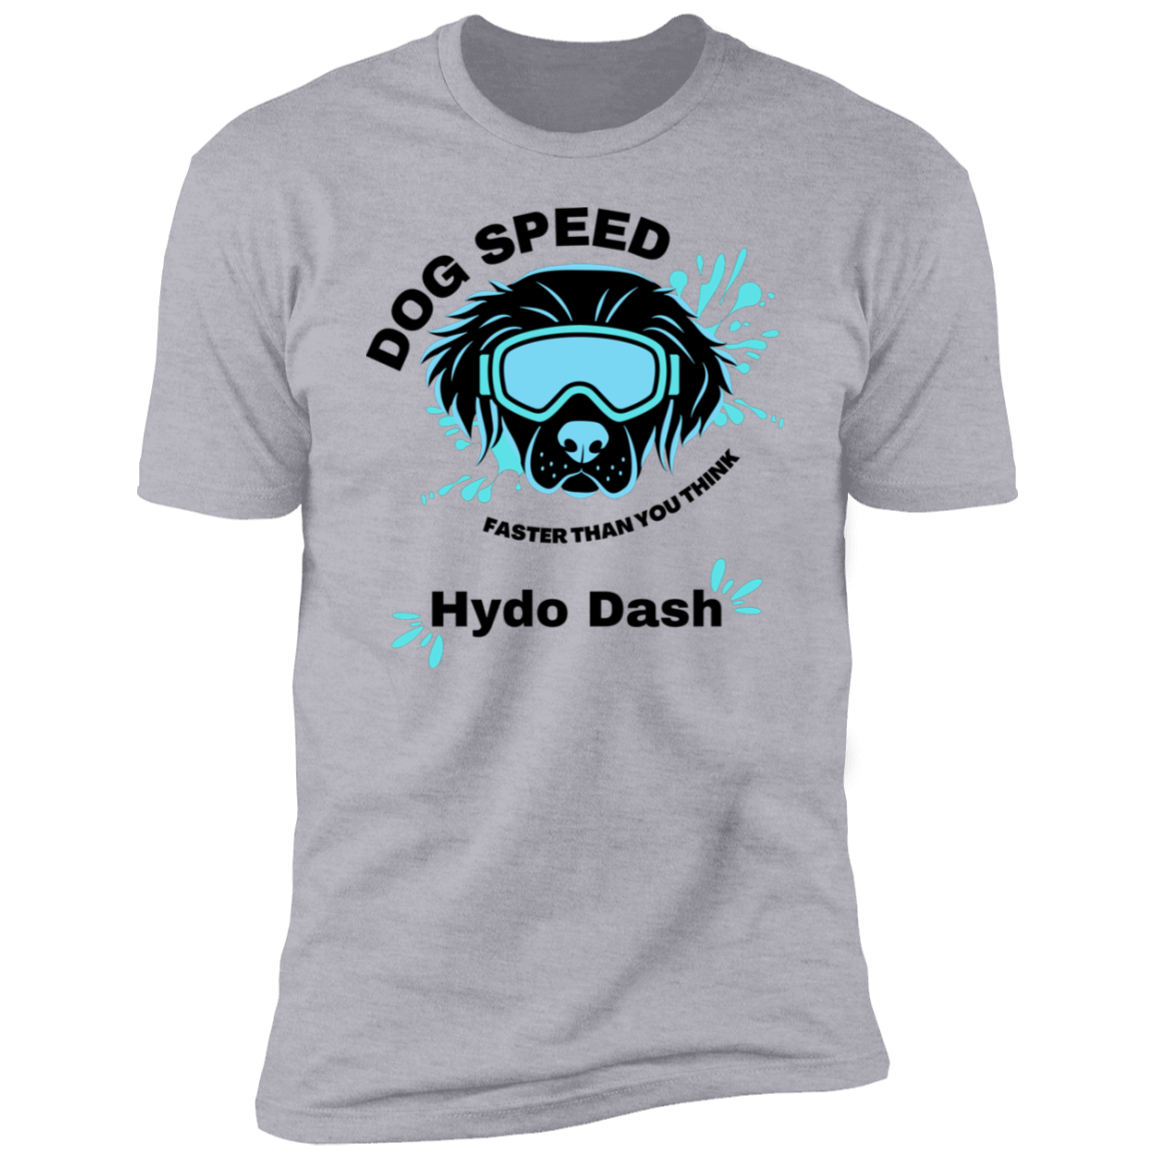 Dog Speed Faster Than You Think Hydro Dash T-shirt, Hydro Dash shirt dog shirt for humans, in light heather gray